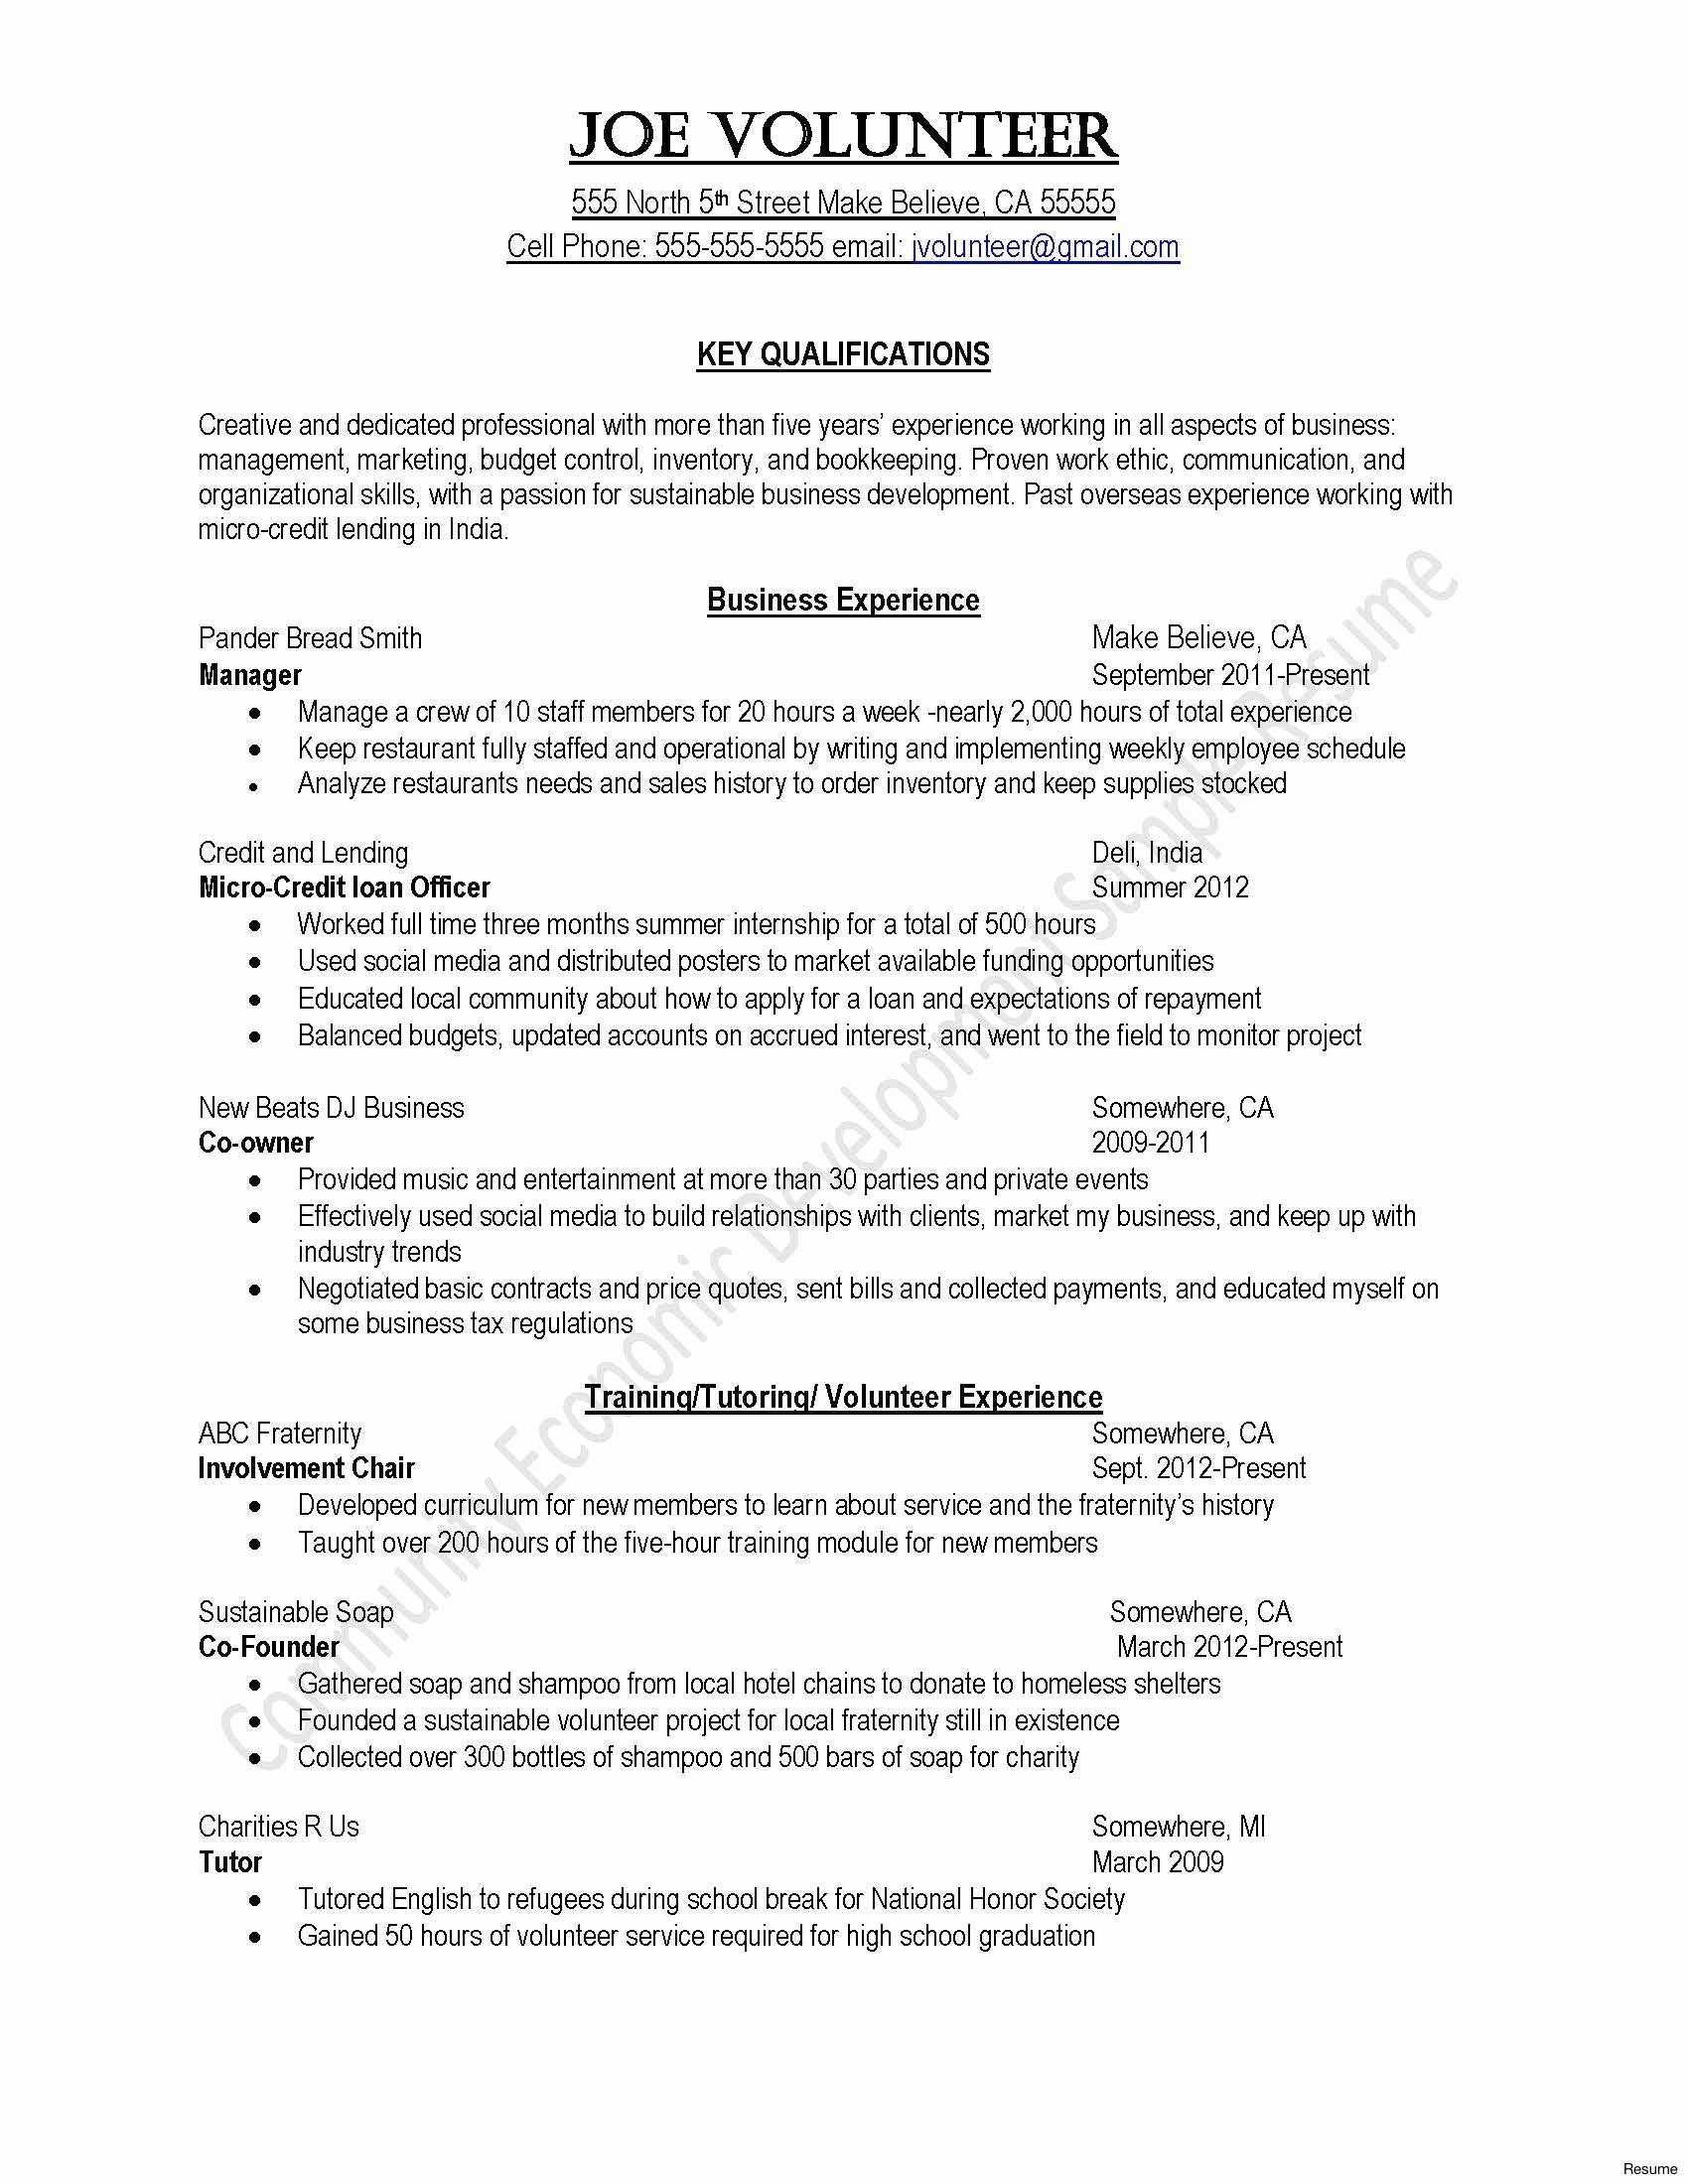 Reconciling A Checking Account Worksheet Answers Along with Letterhead Quote Template New Image Result for Account